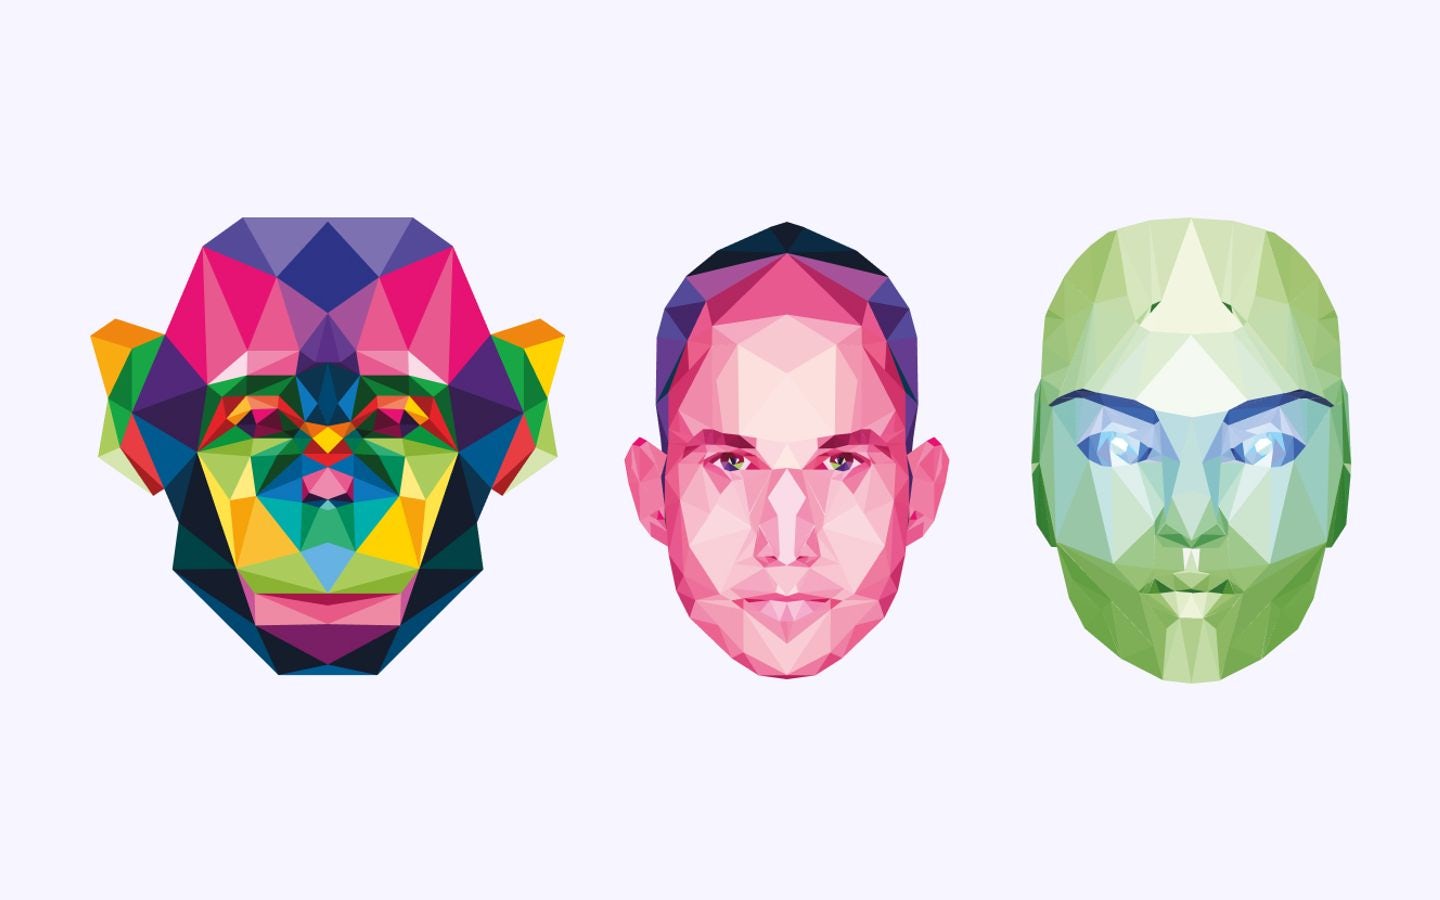 A collection of three abstract, geometric portraits in a colorful prismatic style. From left to right, the first is a primate, the second a human male, and the third a human female face with glowing eyes, all rendered in a modern low-poly art style.